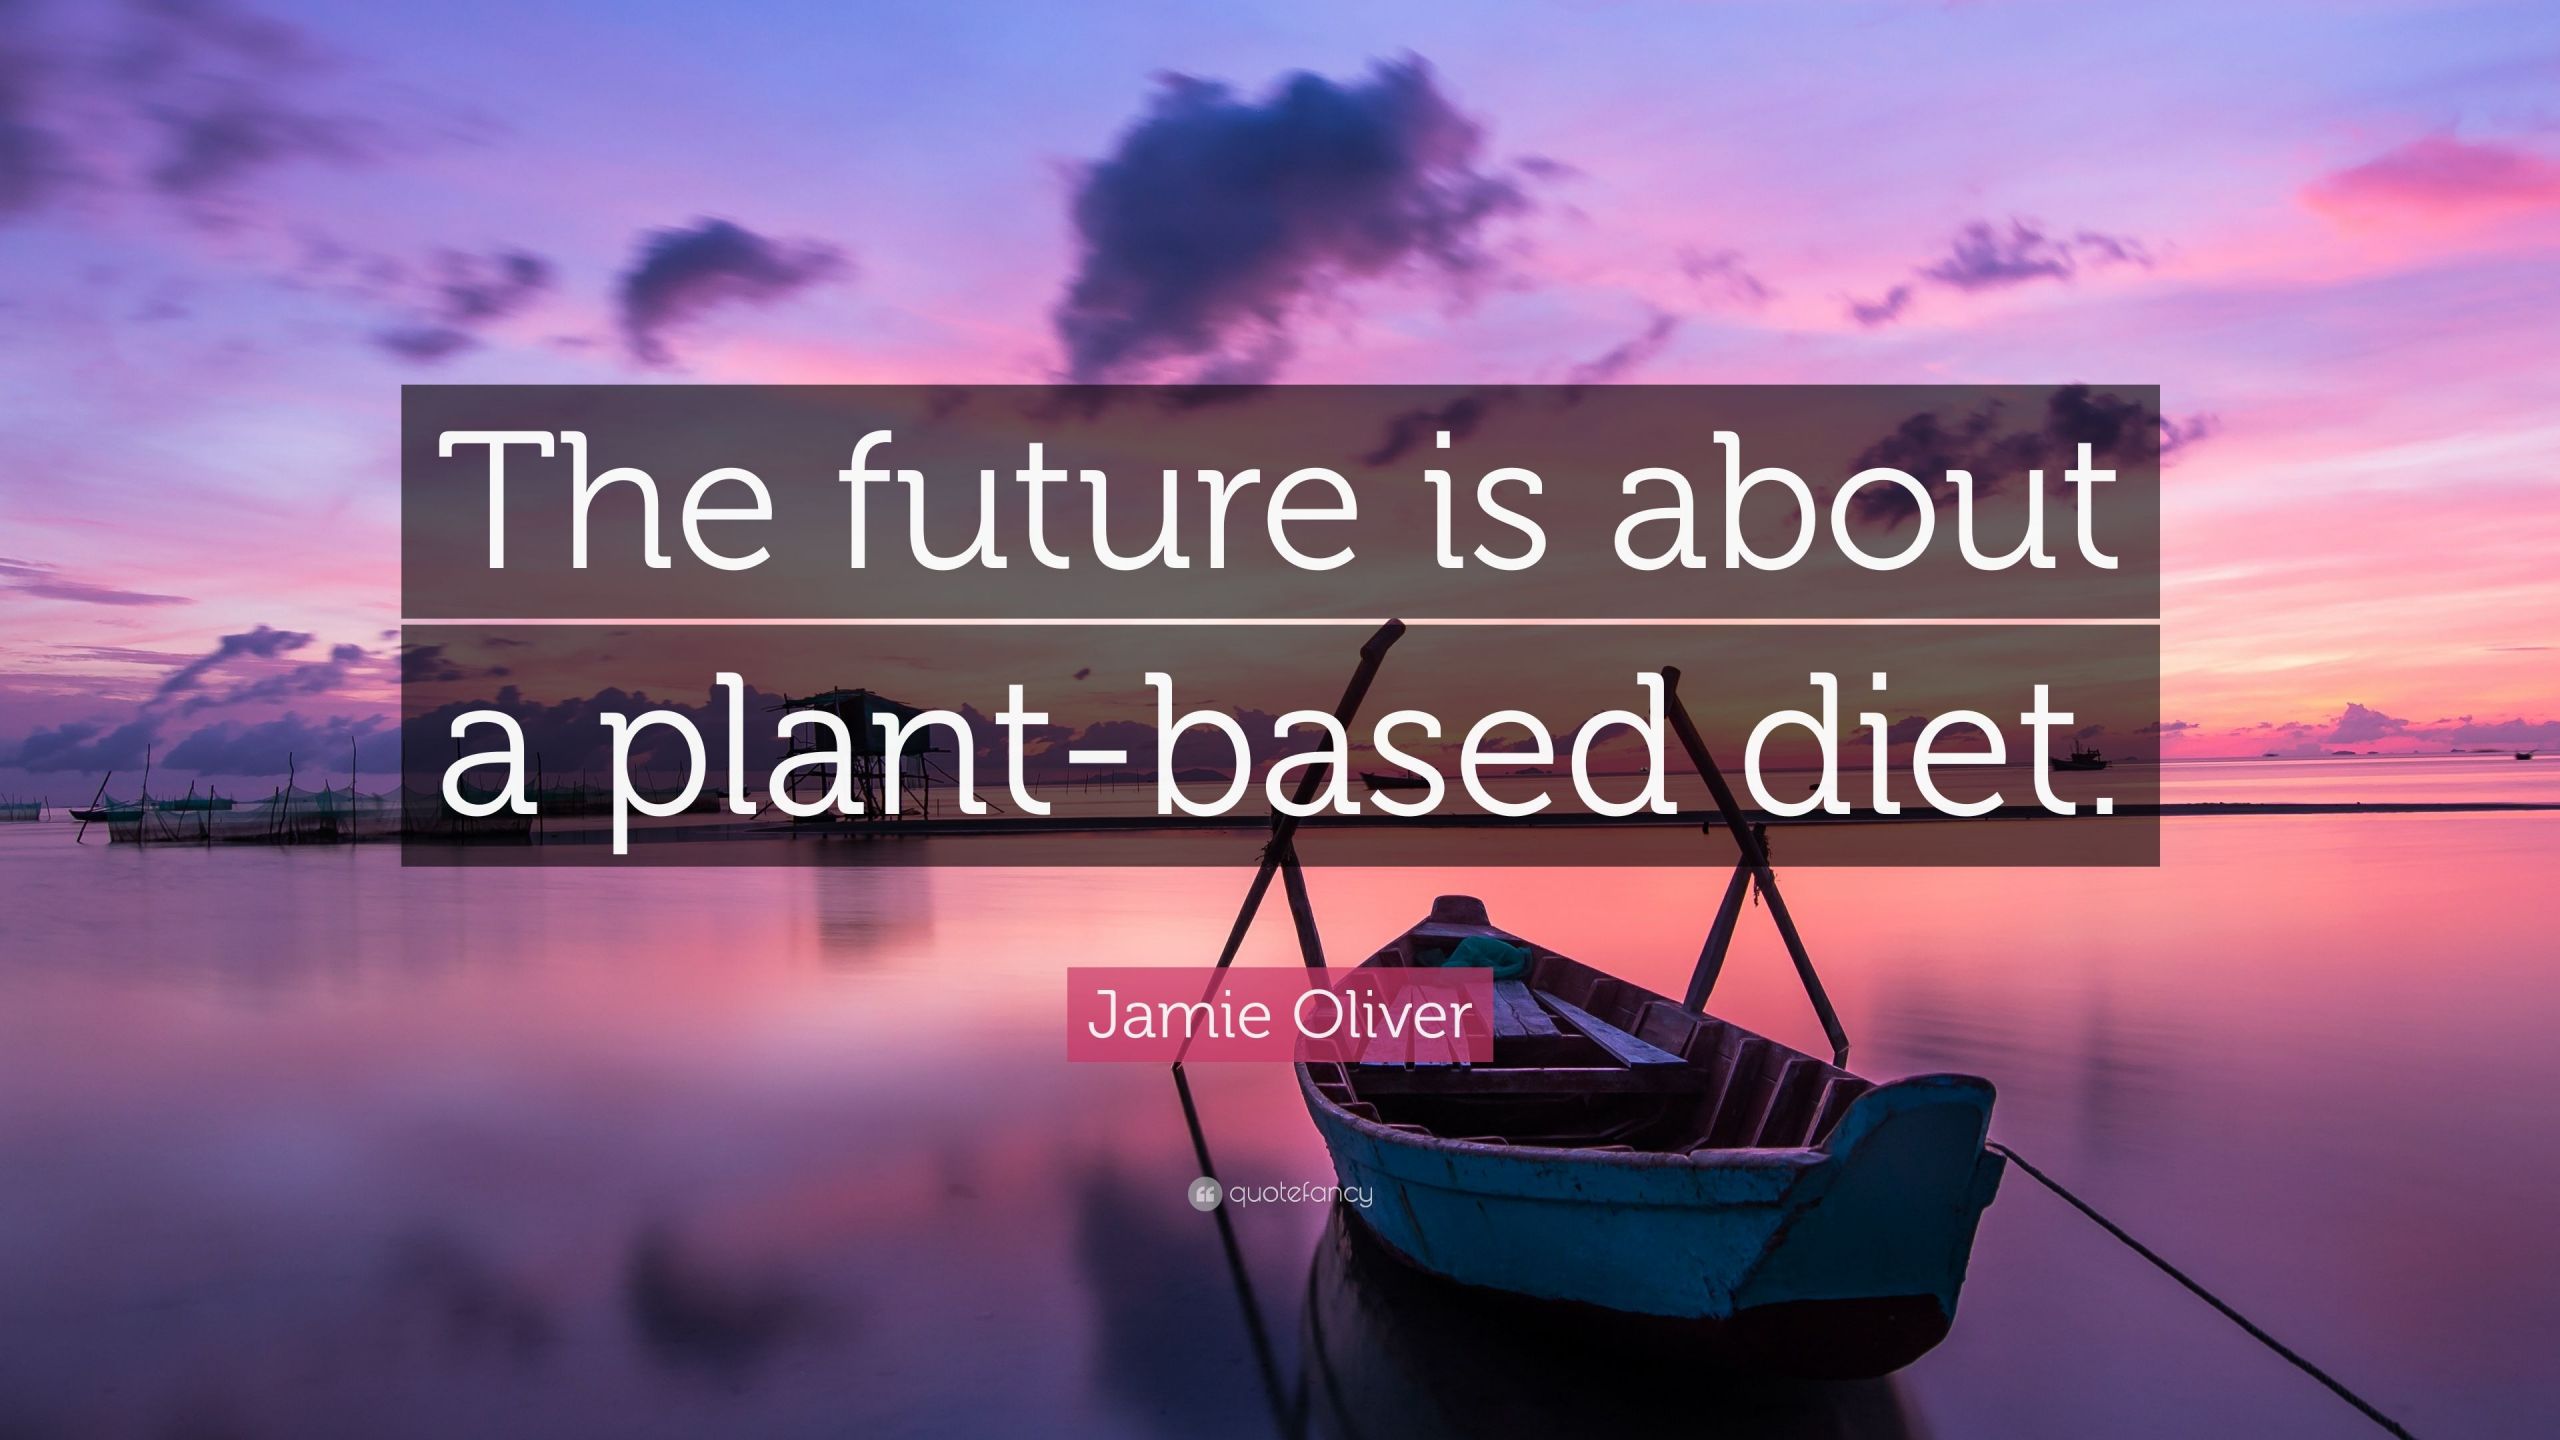 Plant Based Diet Quotes
 Jamie Oliver Quote “The future is about a plant based